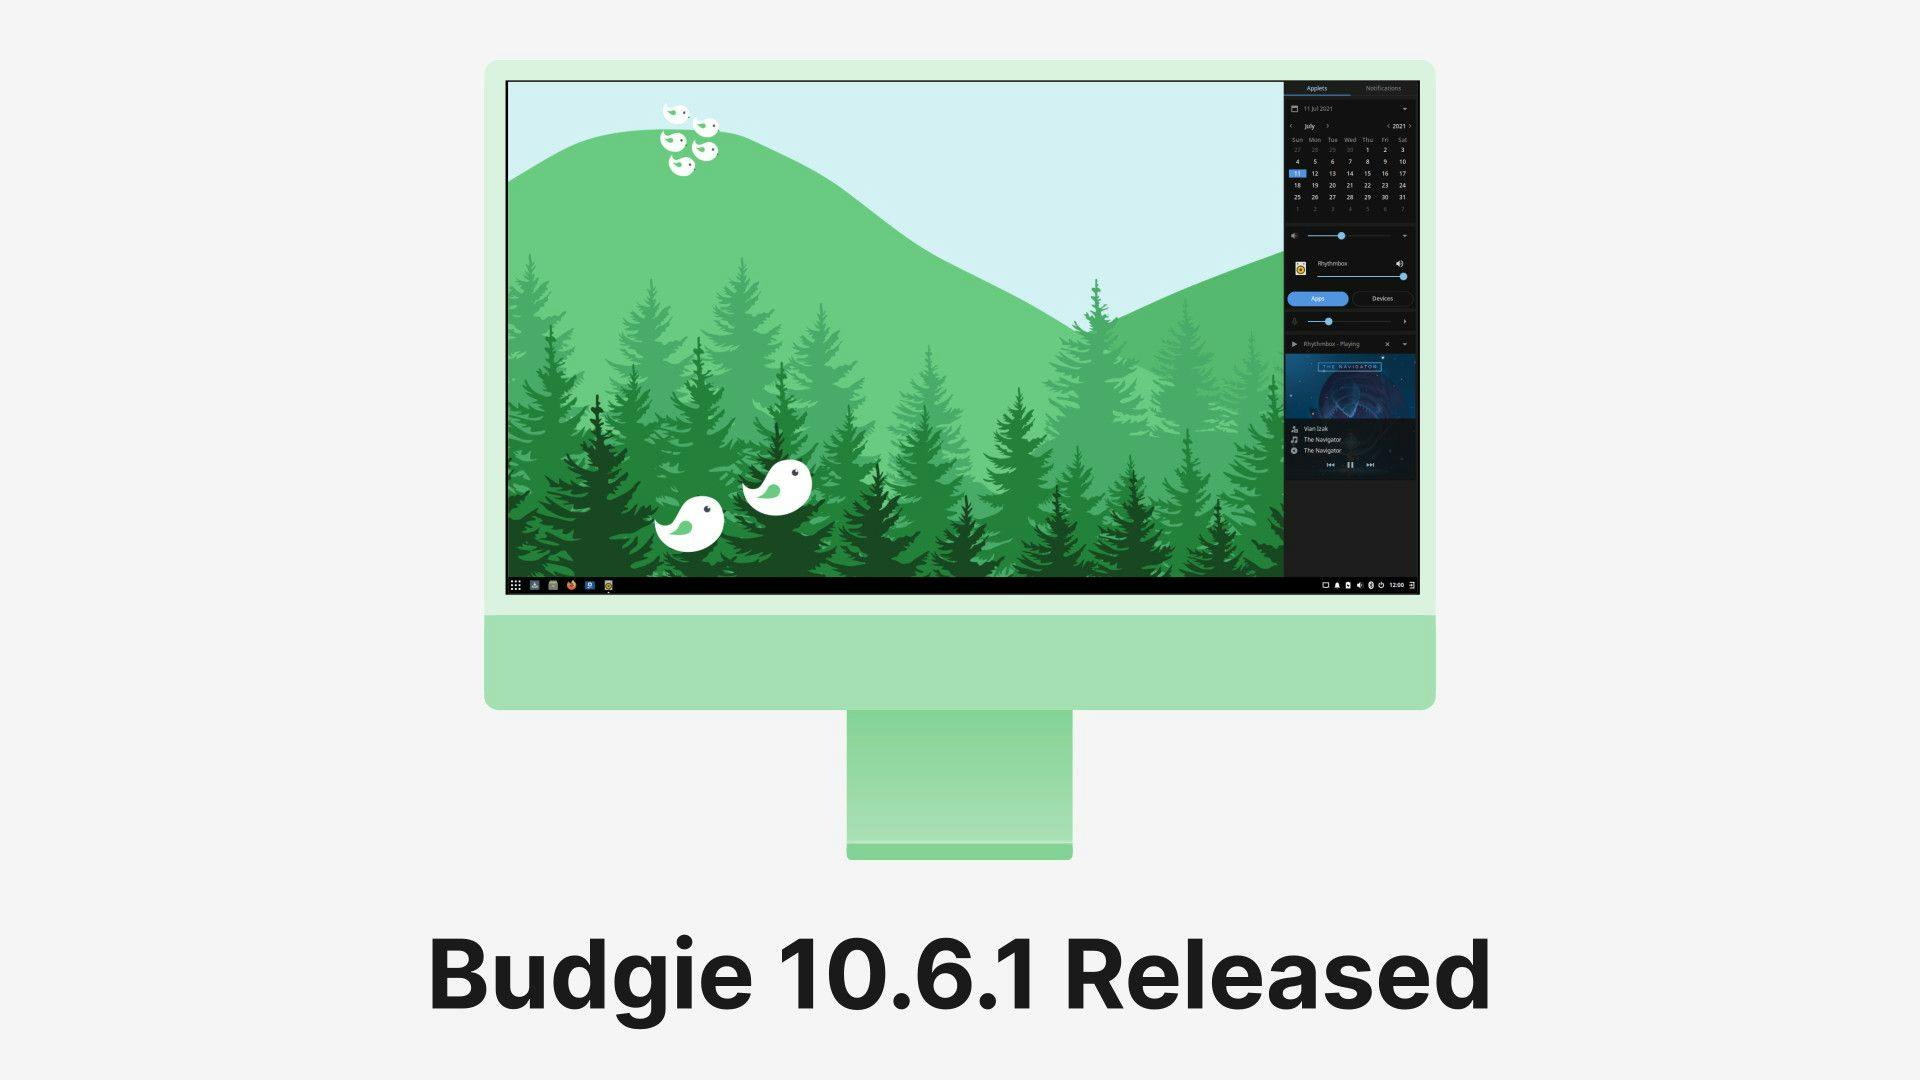 Budgie 10.6.1 Released